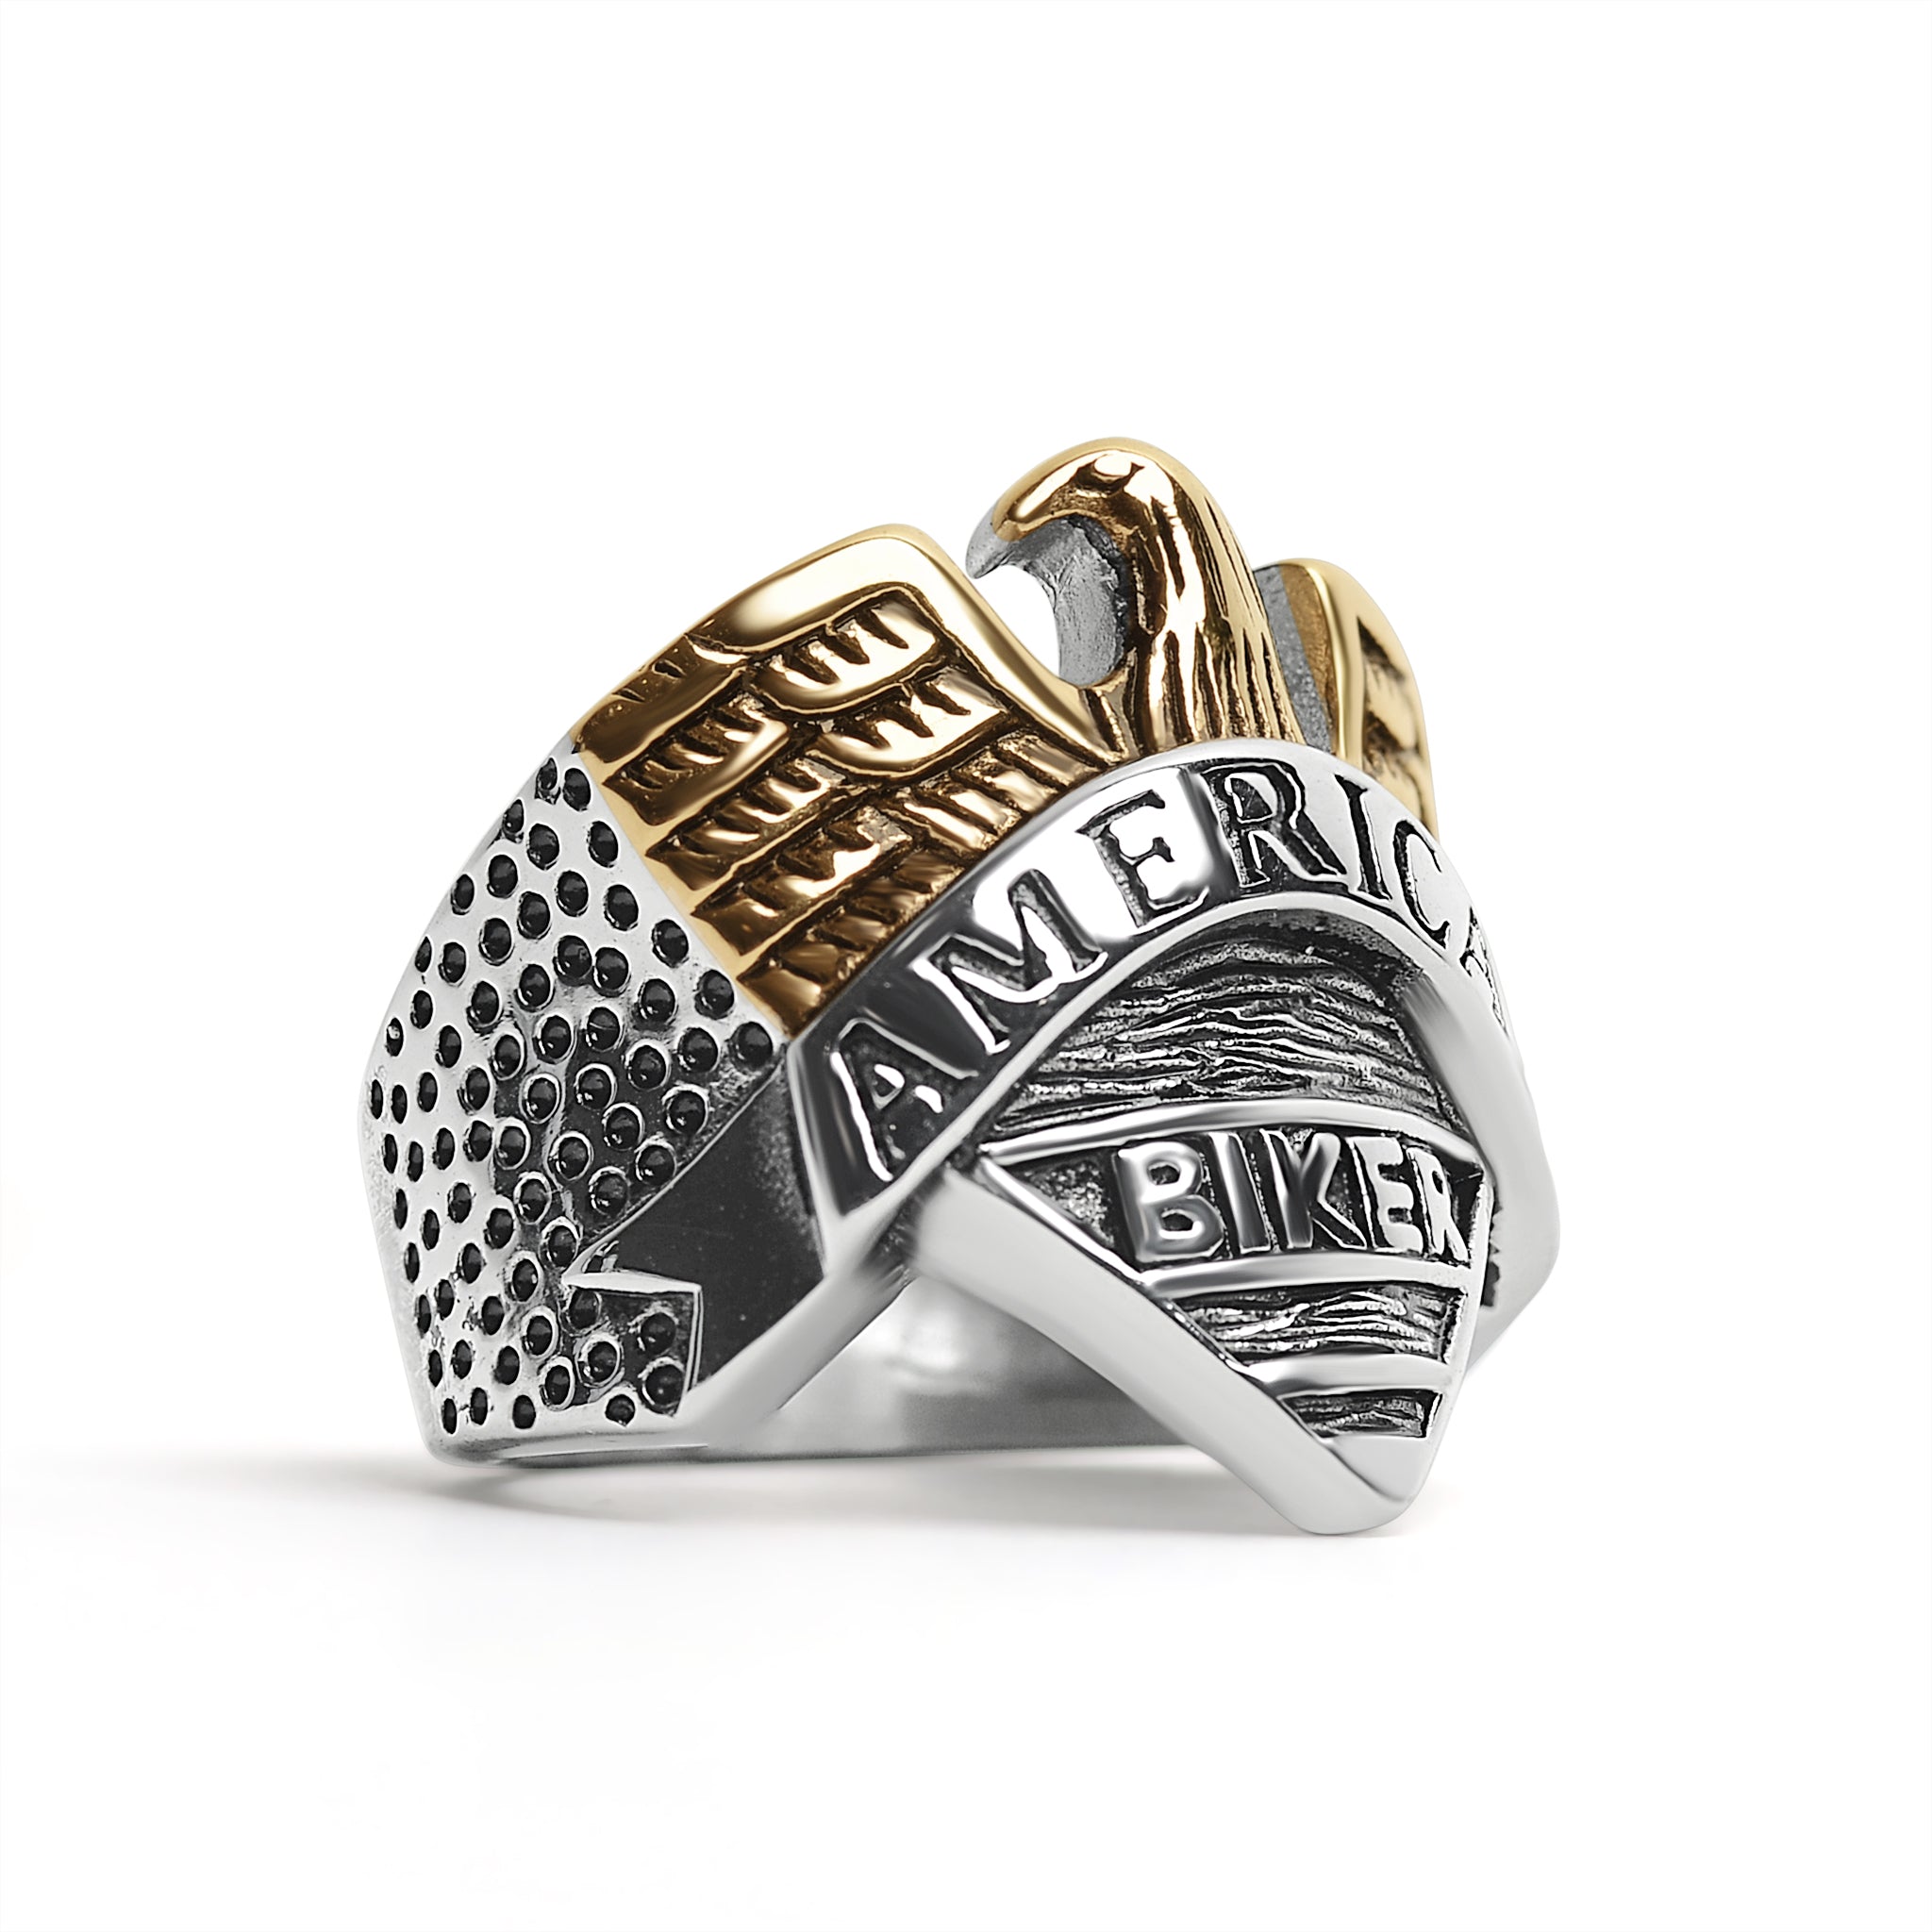 Stainless Steel "AMERICAN BIKER" With 18K Gold PVD Coated Eagle Ring / SCR4074